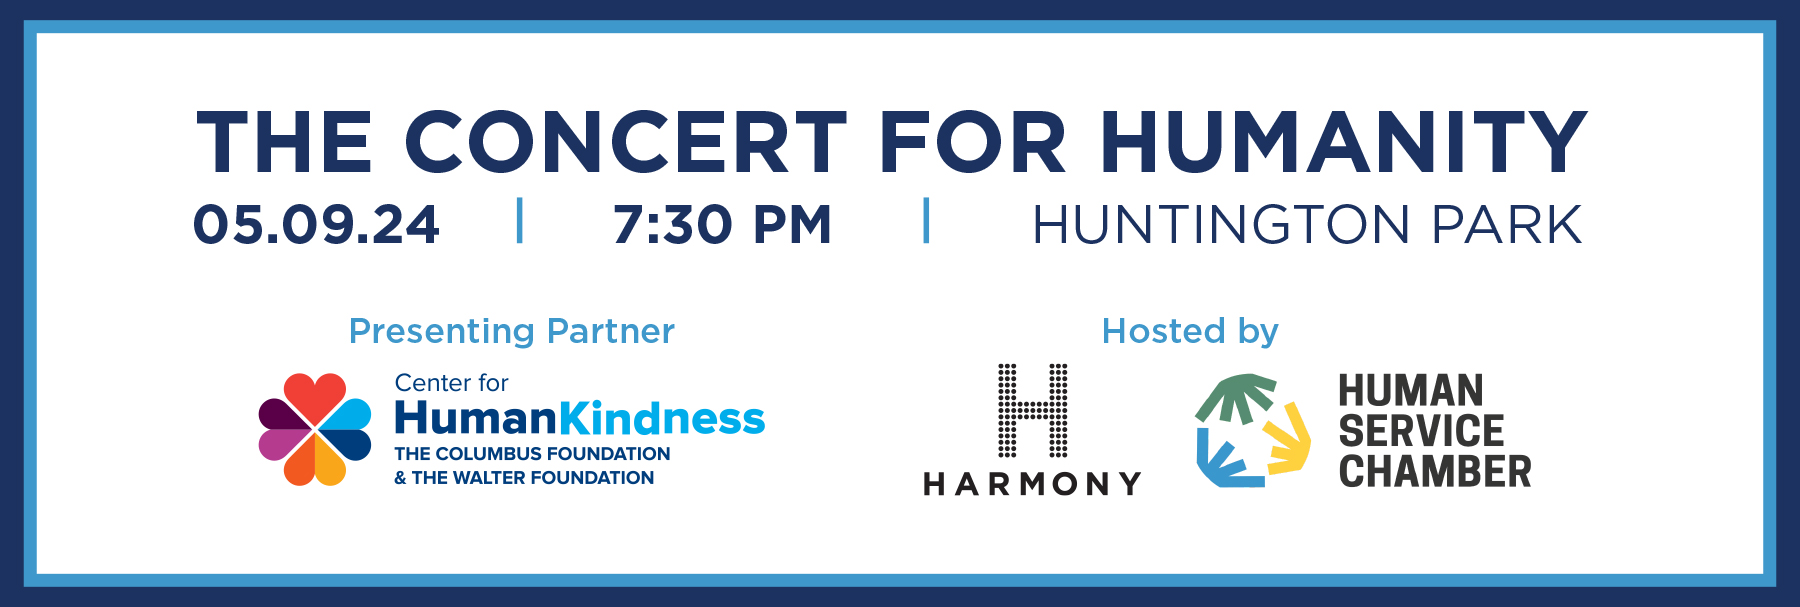 Concert for Humanity